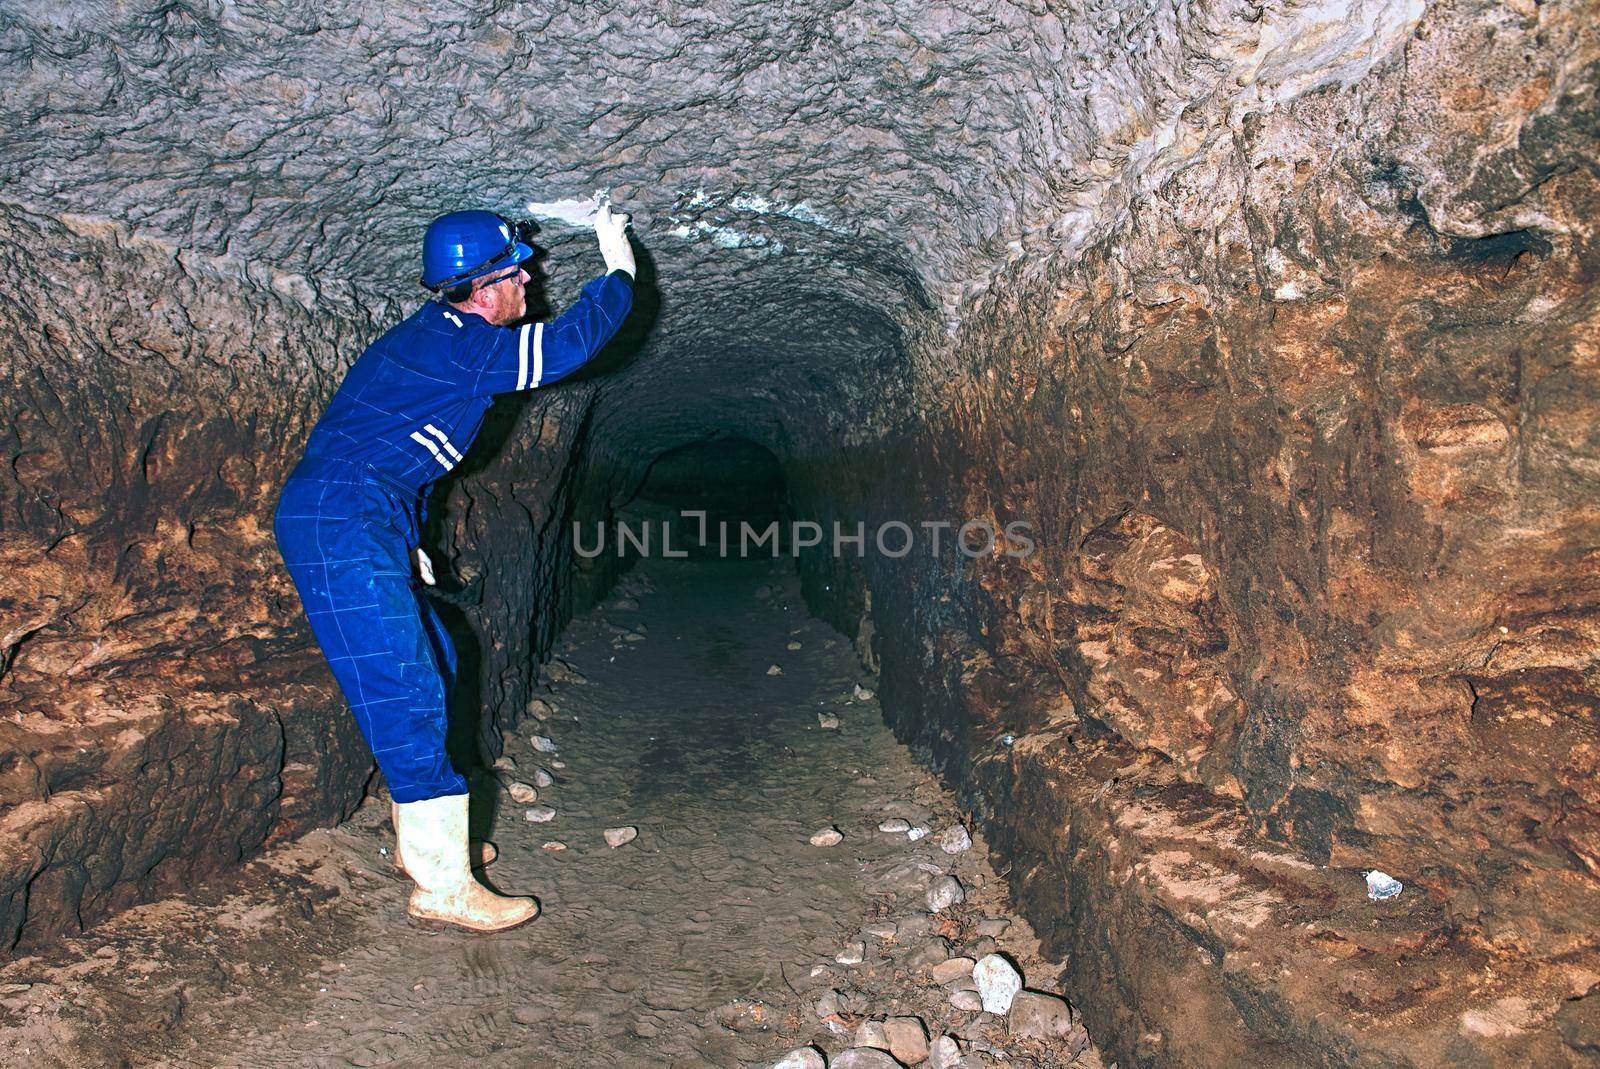 Worker in tunnel. Staff  in a protective suit check sediments in rocky wall by rdonar2